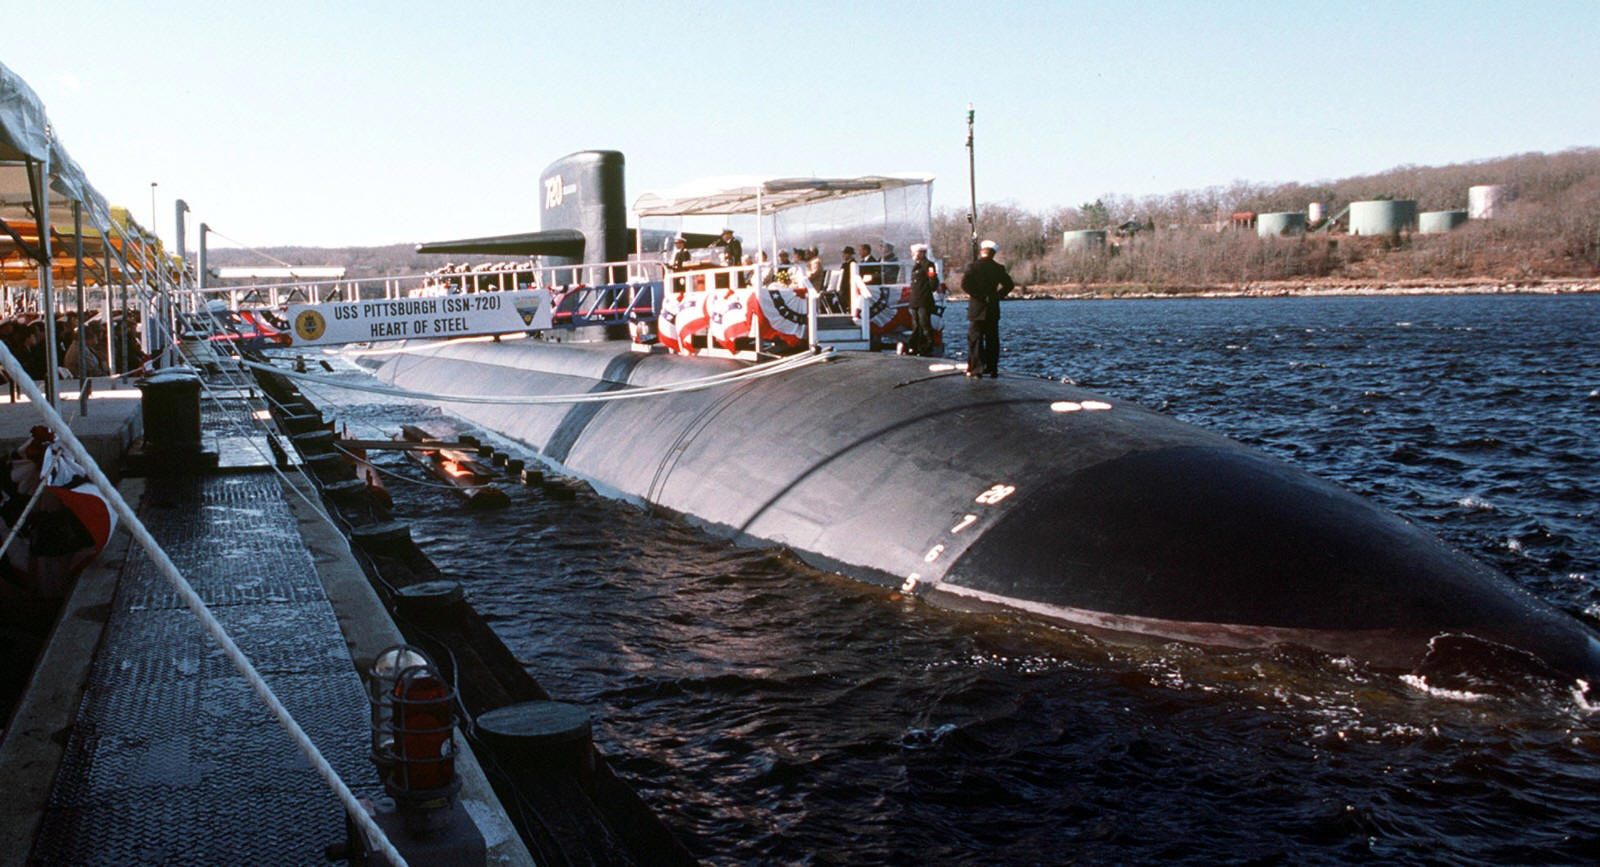 ssn-720 uss pittsburgh commissioning ceremony november 1985